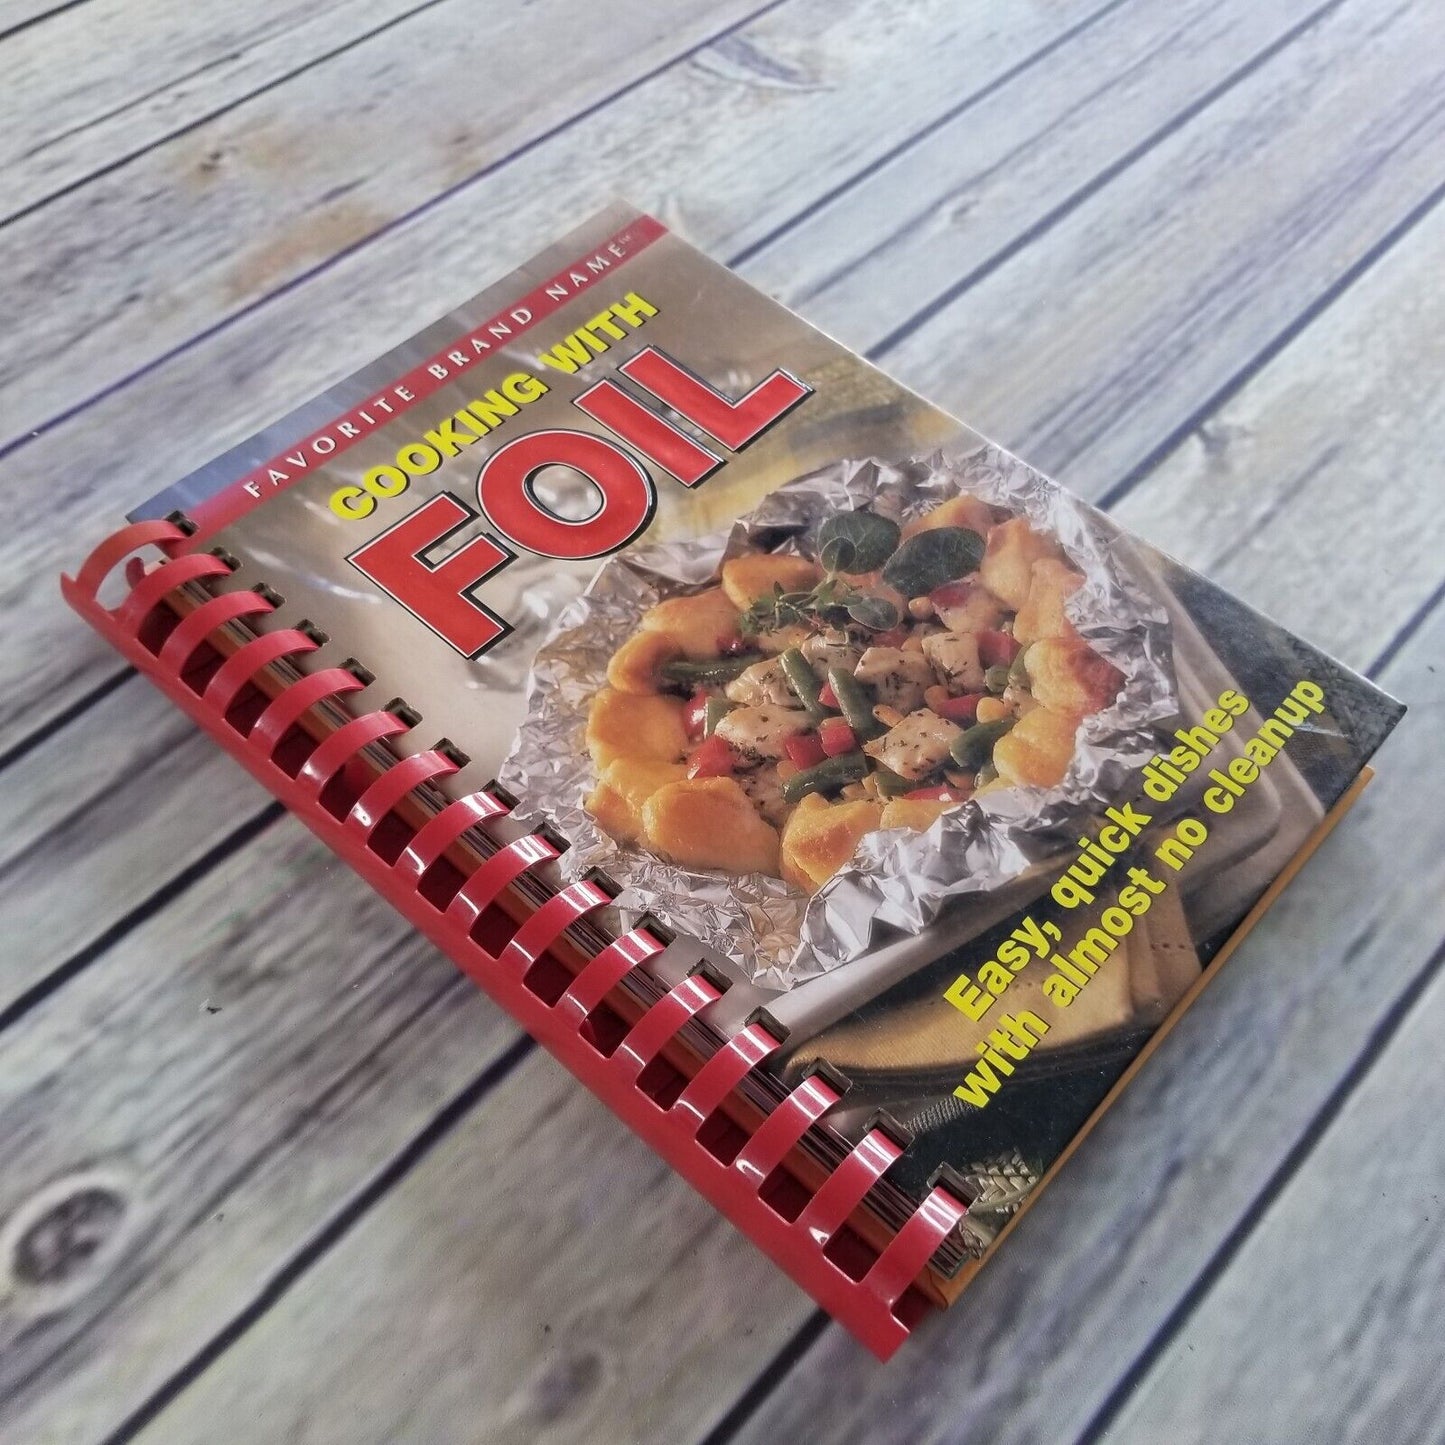 Favorite Brand Name Cooking With Foil Book Cookbook Recipes Hardcover 2004